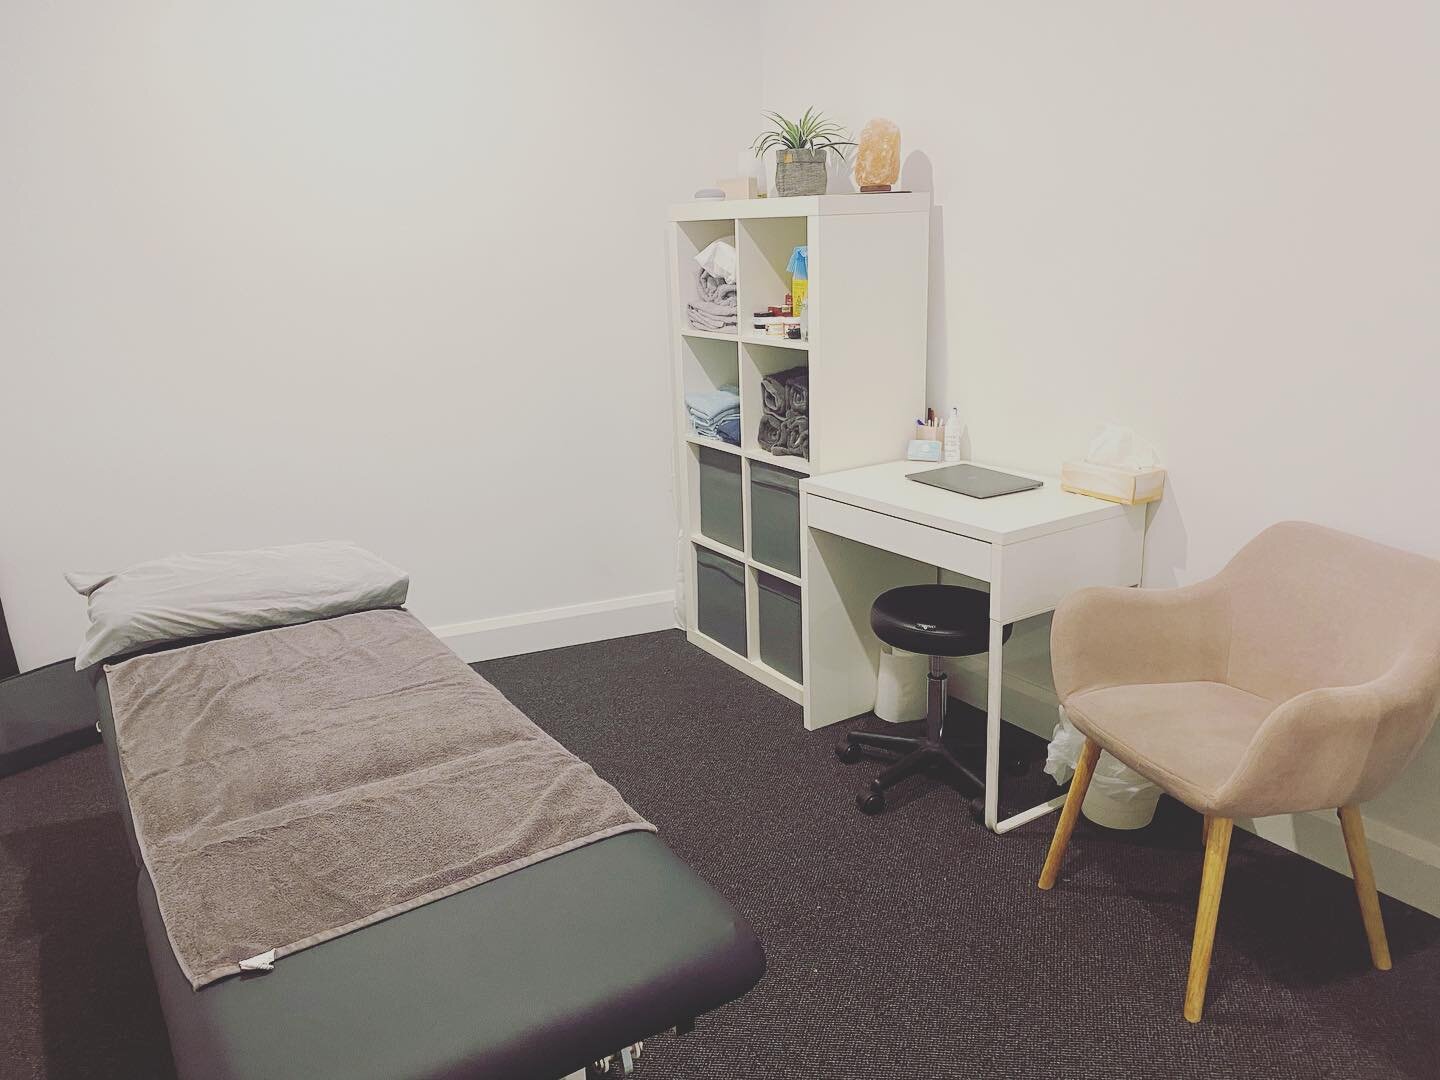 ✨ WE ARE OPEN ✨
As of this Friday, Utopia Osteopathy is open for routine appointments as of Friday the 22nd of October!!
We are taking extra measures to ensure the clinic is thoroughly cleaned between each patient 

We cannot wait to see you all back